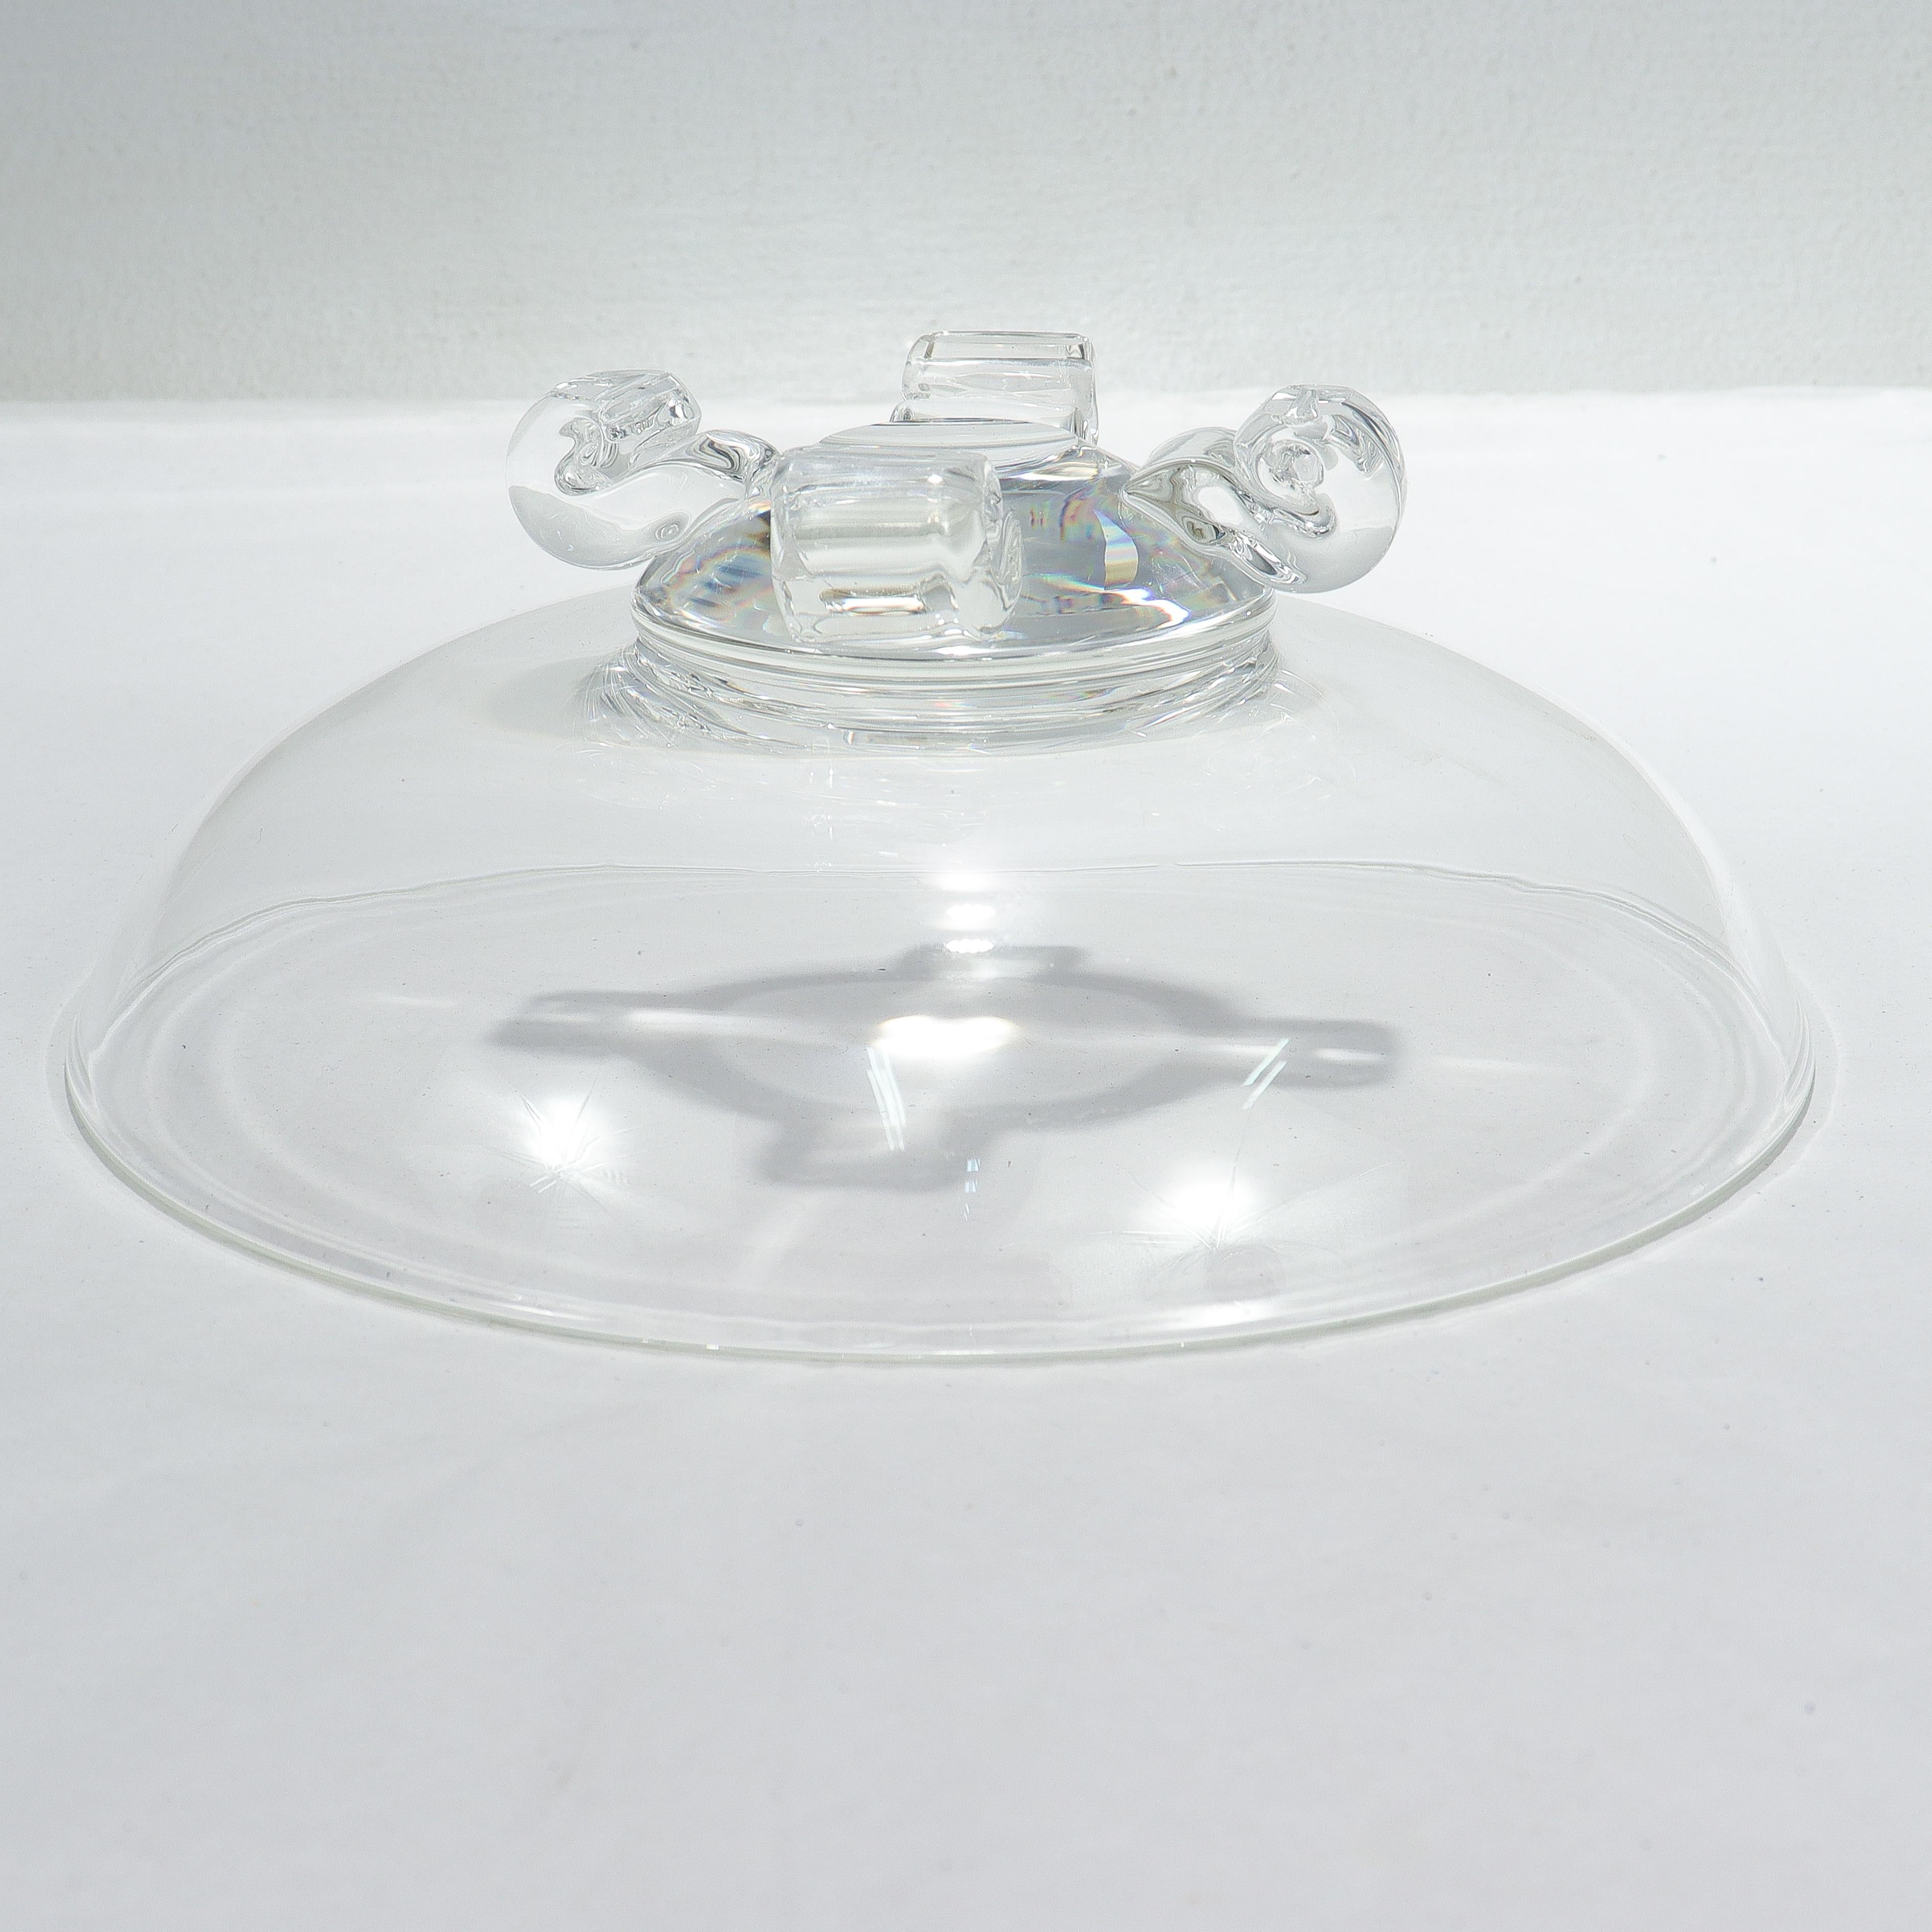 Mid-Century Modern Steuben Scroll Footed Art Glass Bowl Model No. 7907 In Good Condition For Sale In Philadelphia, PA